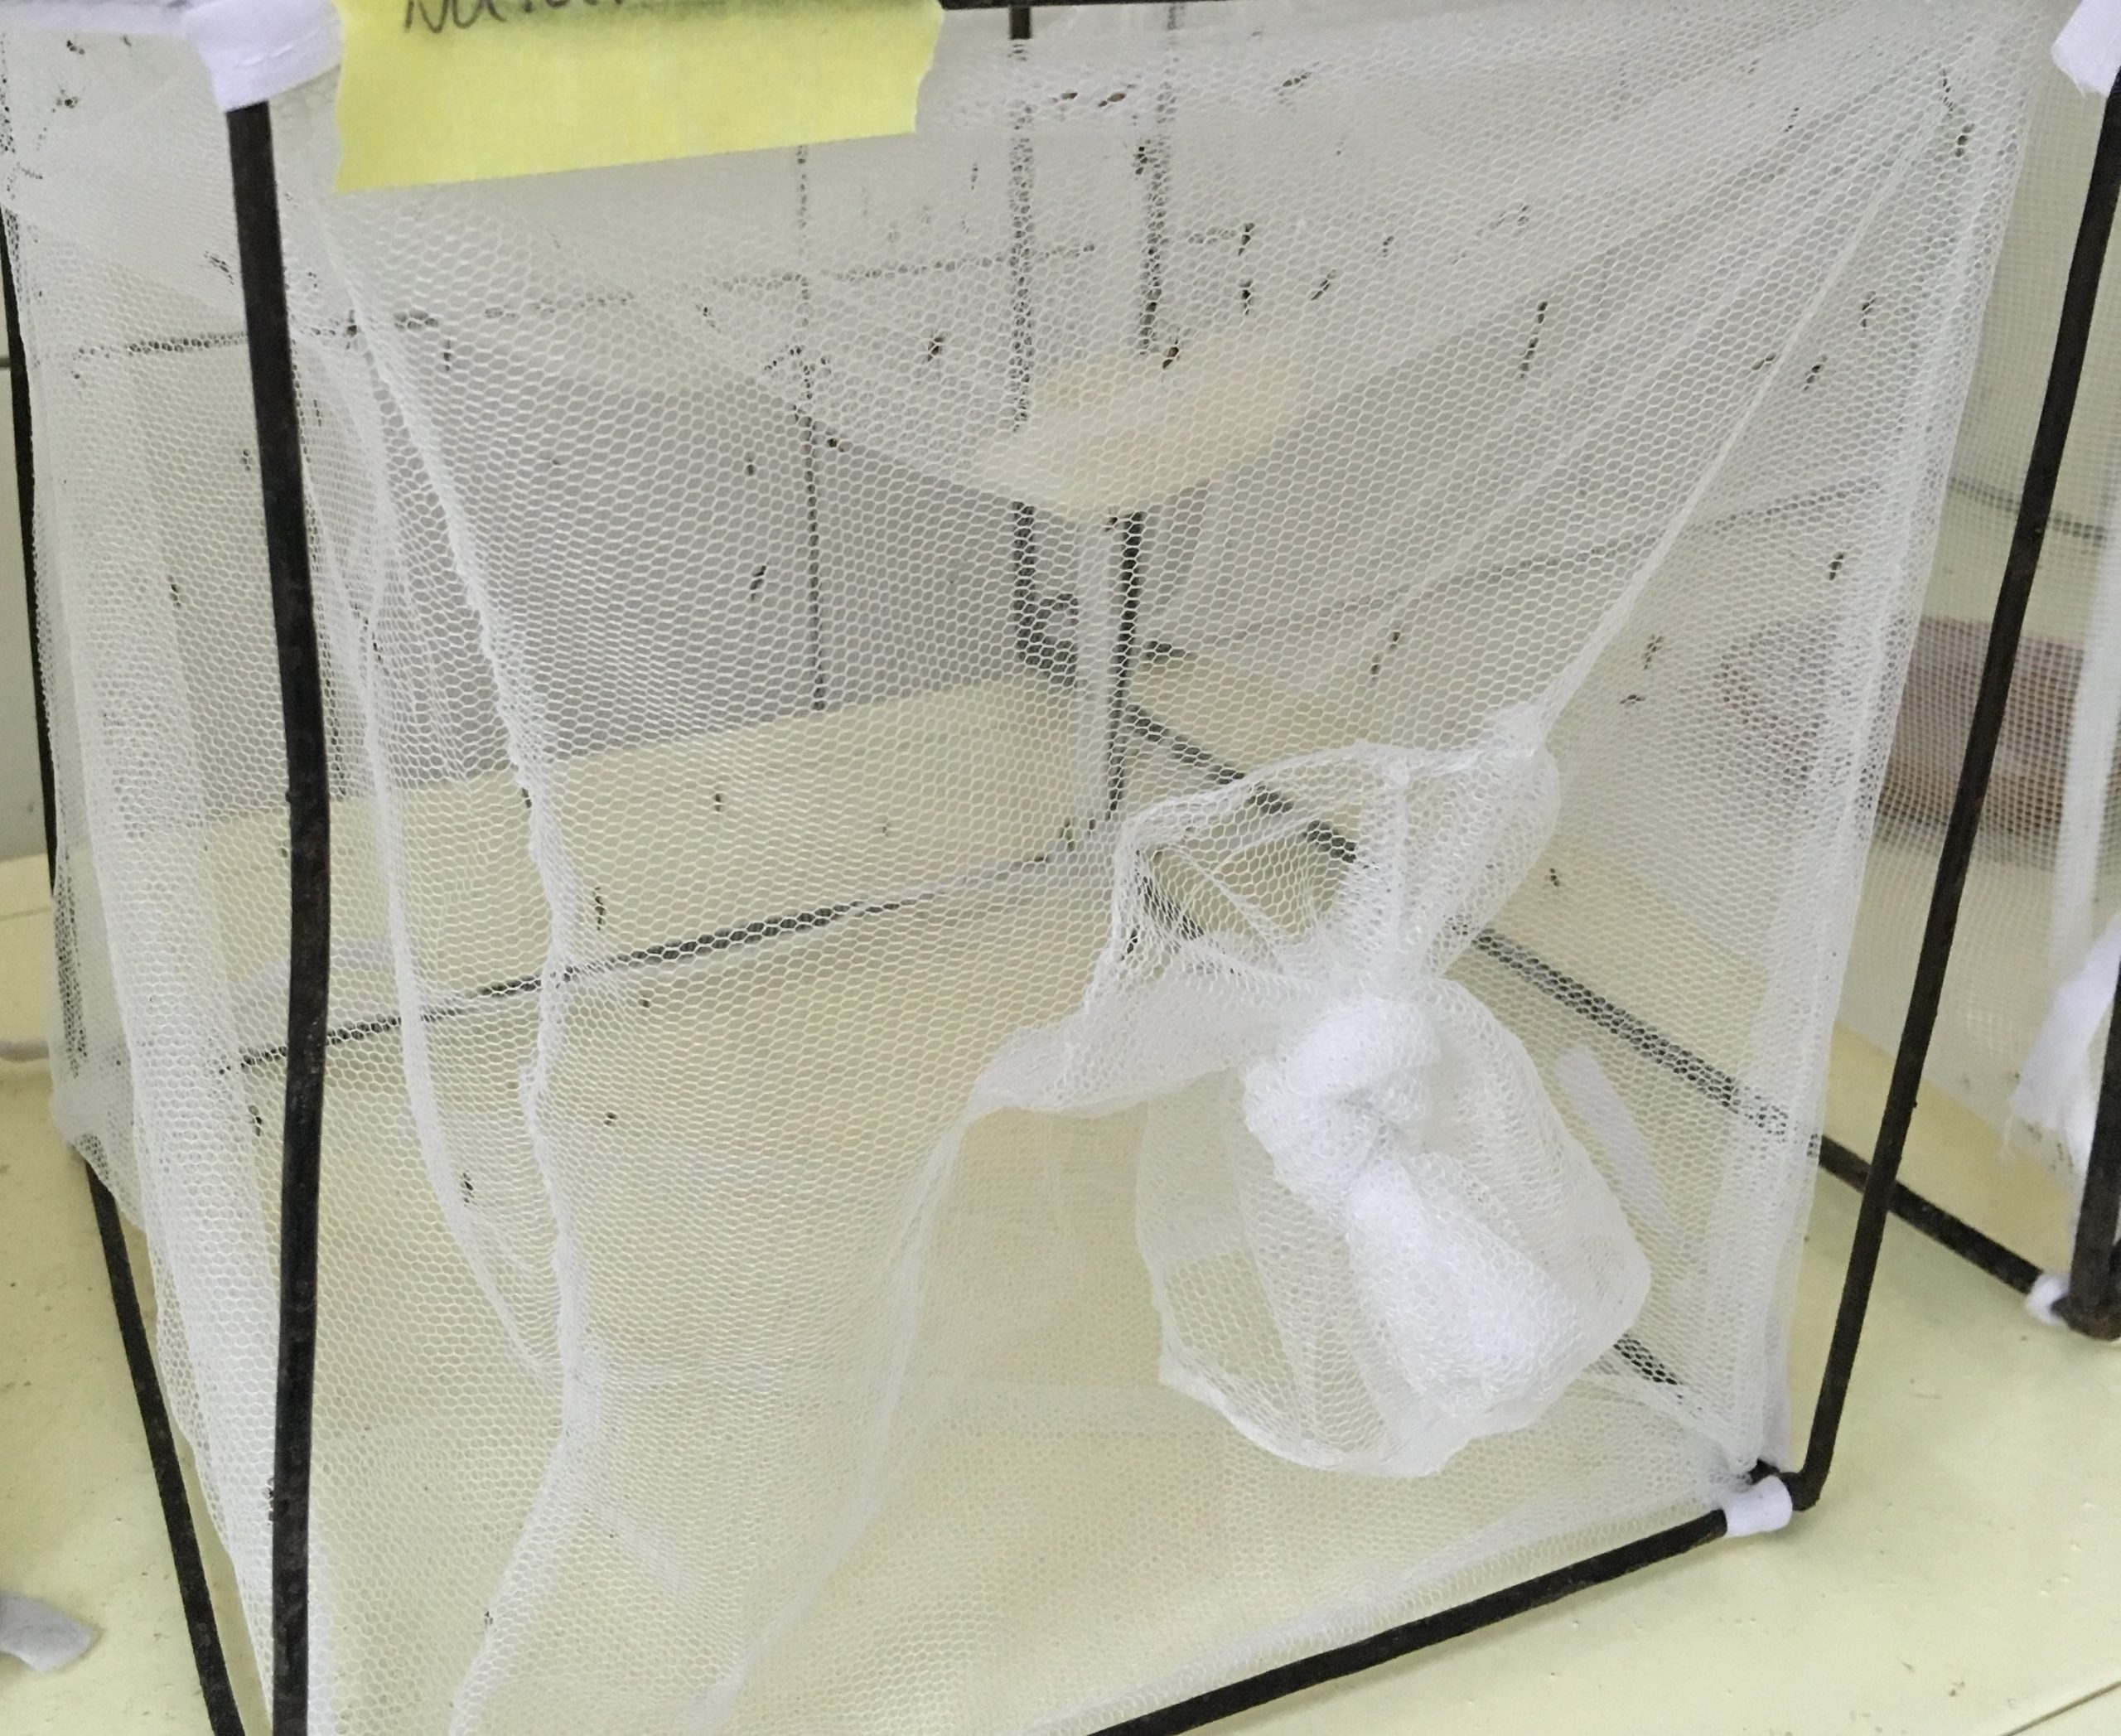 Mosquito cage showing a black metal frame and netting on all sides with a knot in the netting in the front to close the opening. Numerous mosquitoes are inside.